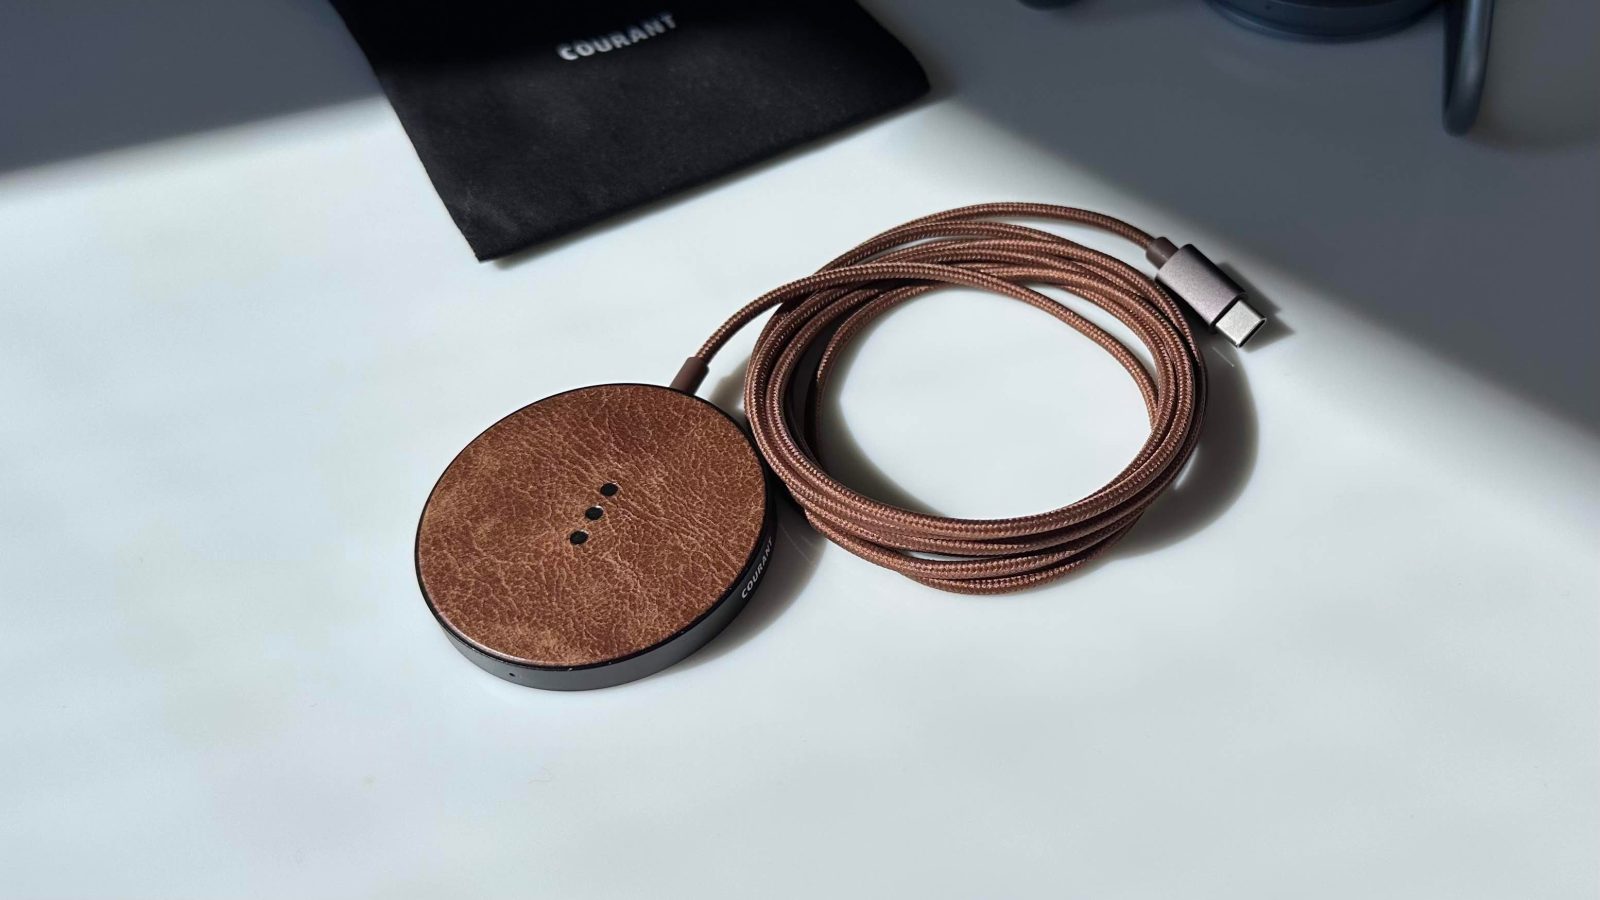 Hands-on with the Courant premium leather or linen MagSafe-compatible iPhone charger